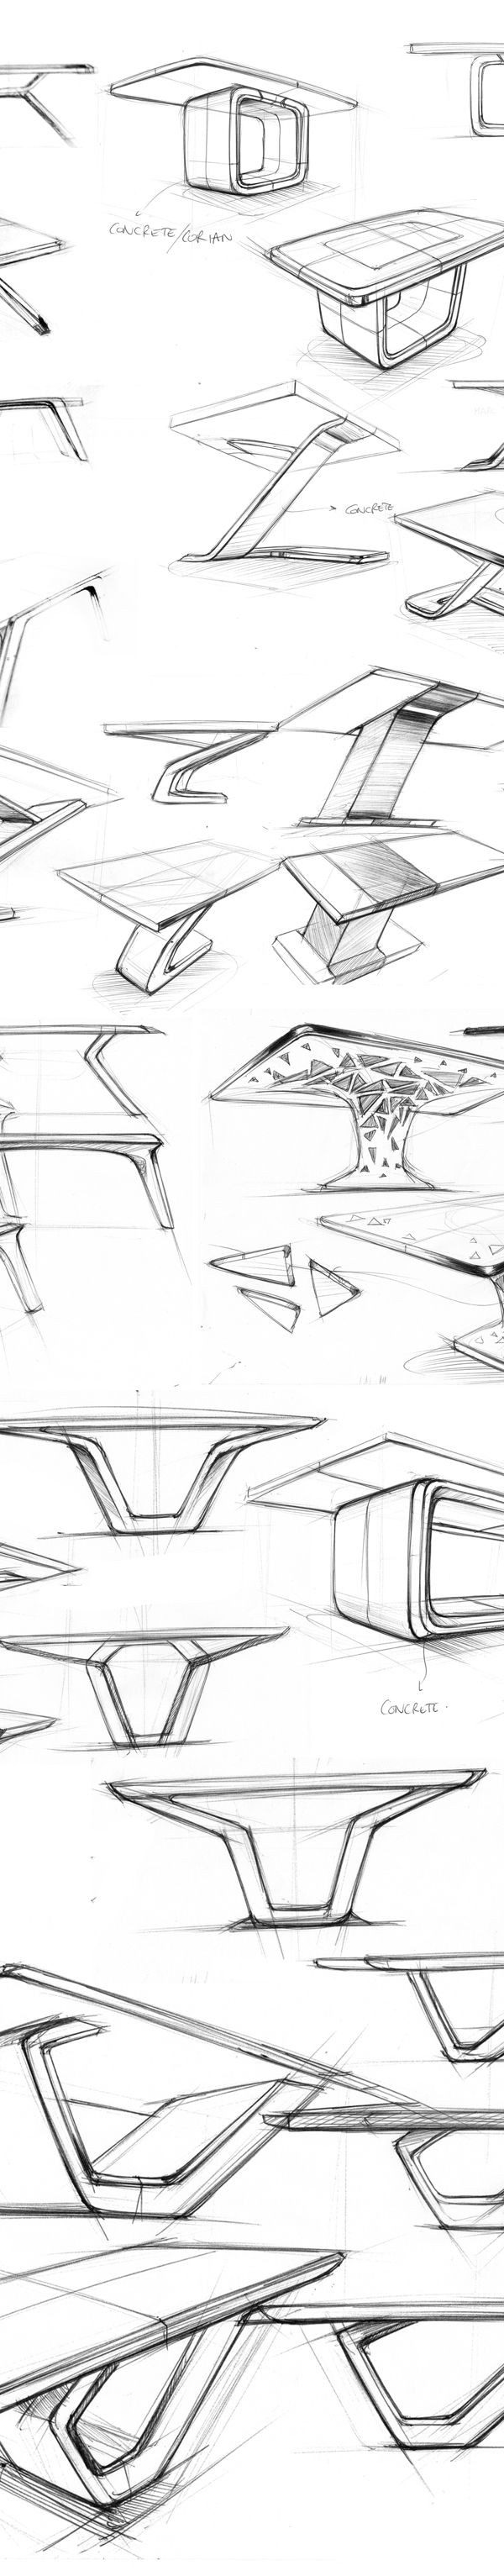 MARBLE TABLE SKETCHES WIP - 2014 by Marc TRAN, via...